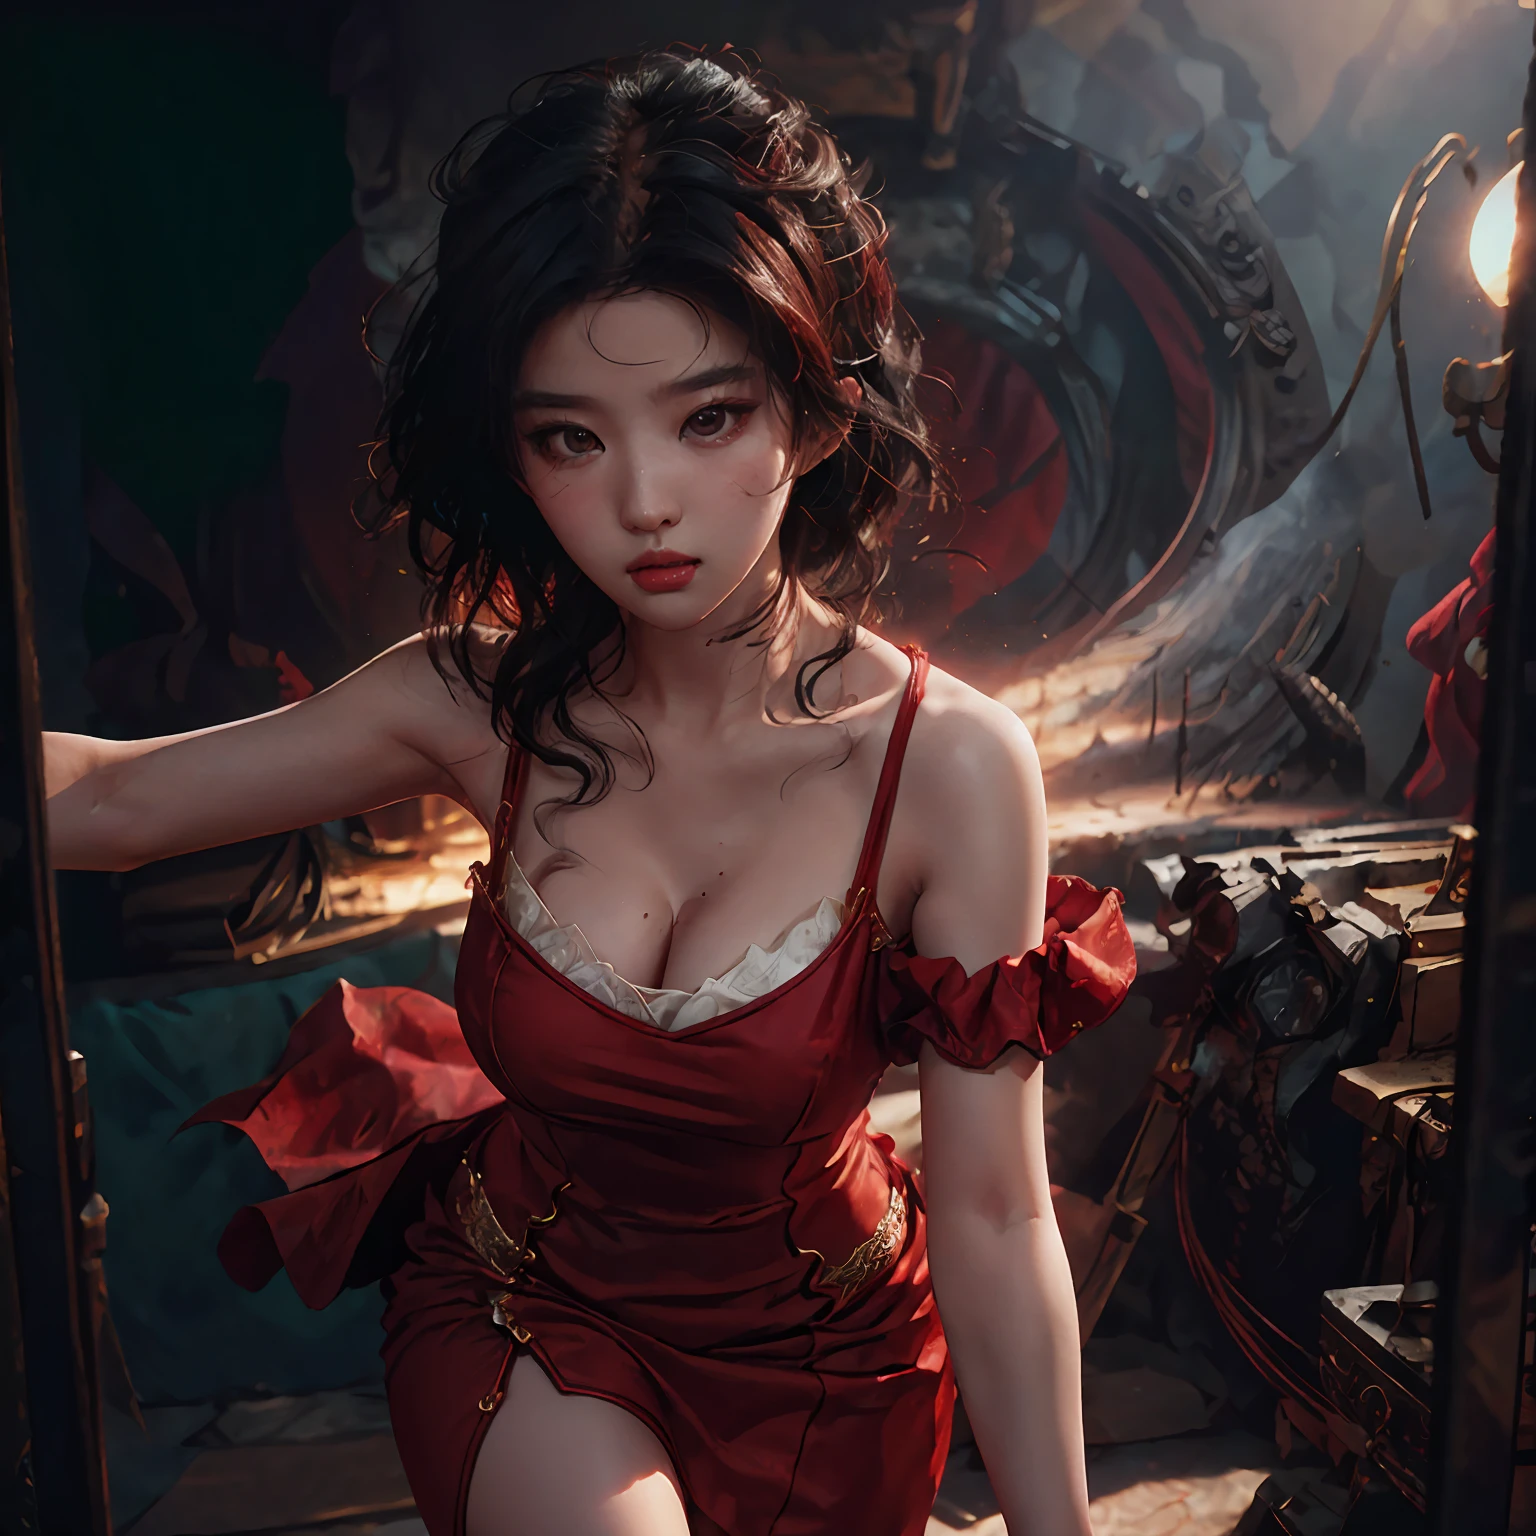 Ace, 4k, High Resolution, Masterpiece, Best Quality, Head: 1.3, (Korean K-pop Idol), Delicate Skin, Sharp Focus, (Cinema Lighting), Clavicle, Morning, Soft Light, Dynamic Angle, [:(detailed face:1.2):0.2], armpit wrinkles, thigh gap, red dress, slim, mid-chest, cleavage, full body, --auto